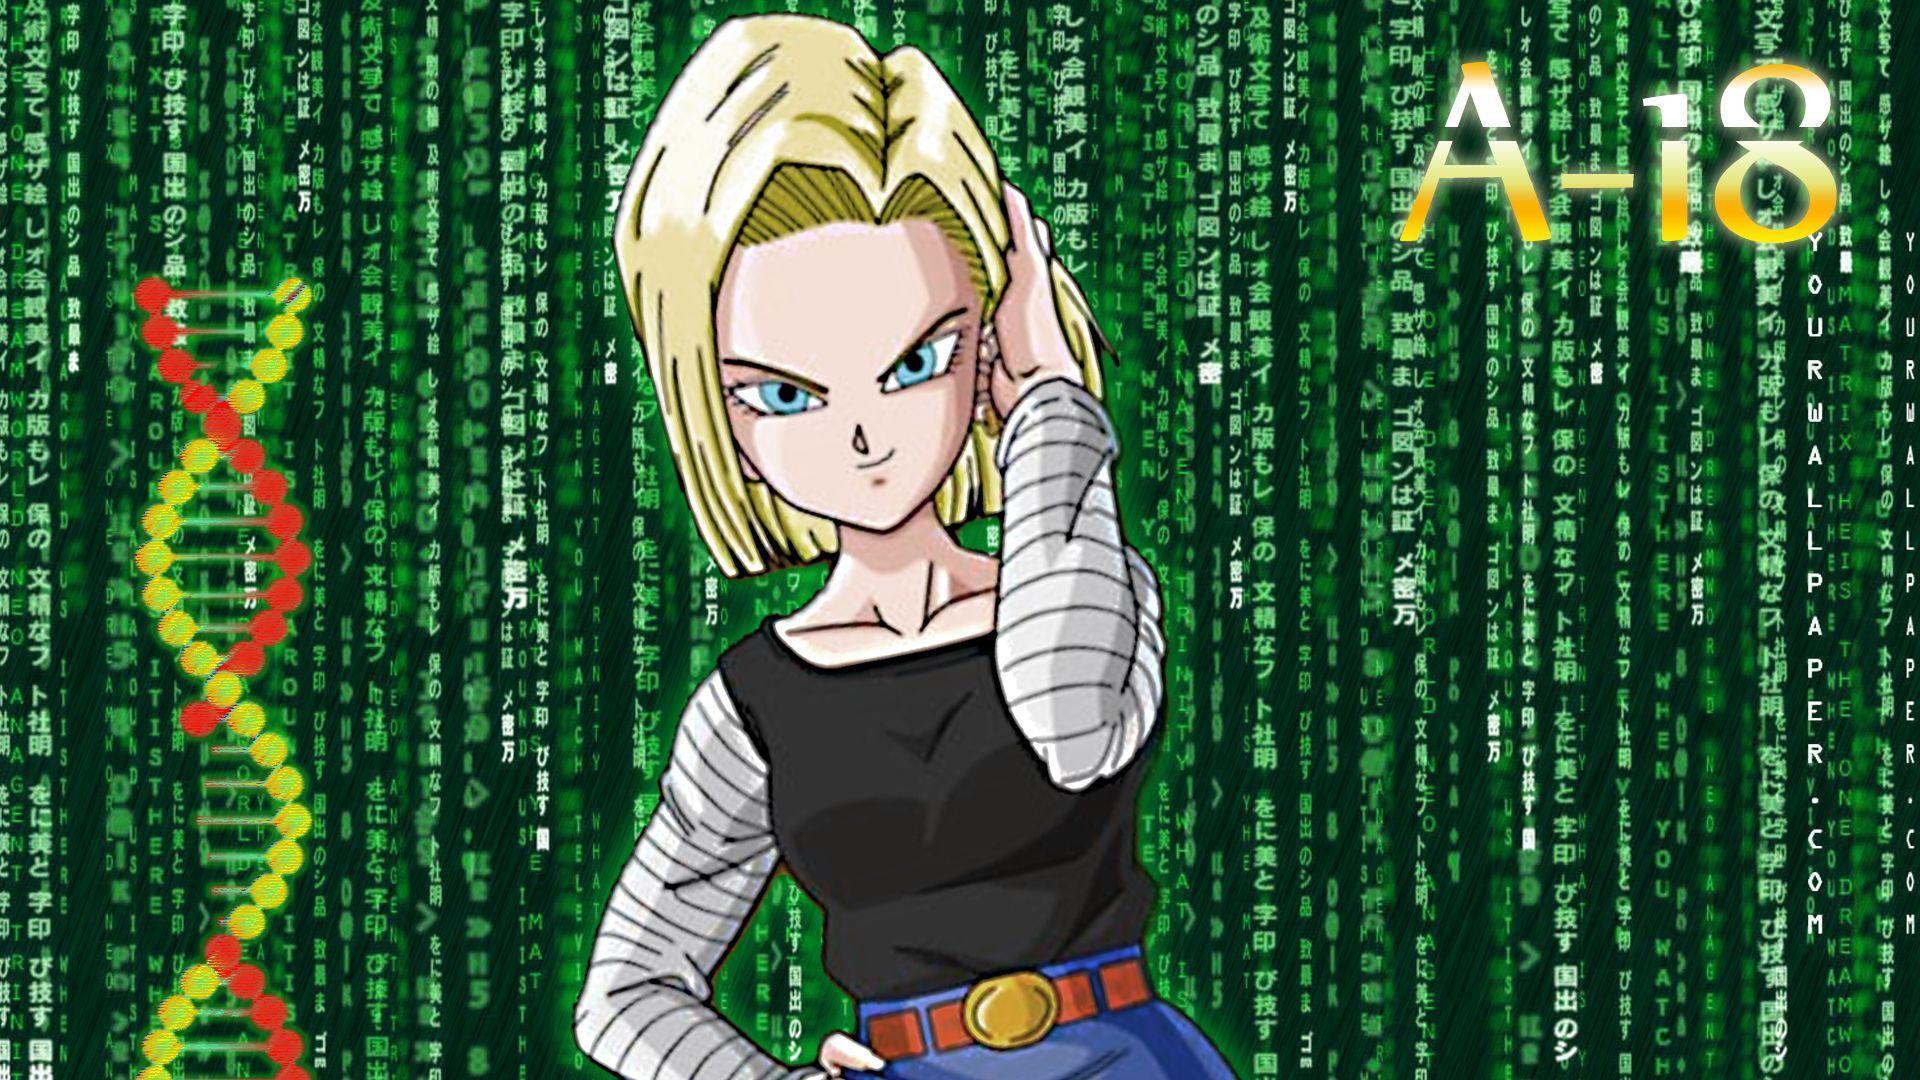 Android 18 Wallpapers – Wallpapers